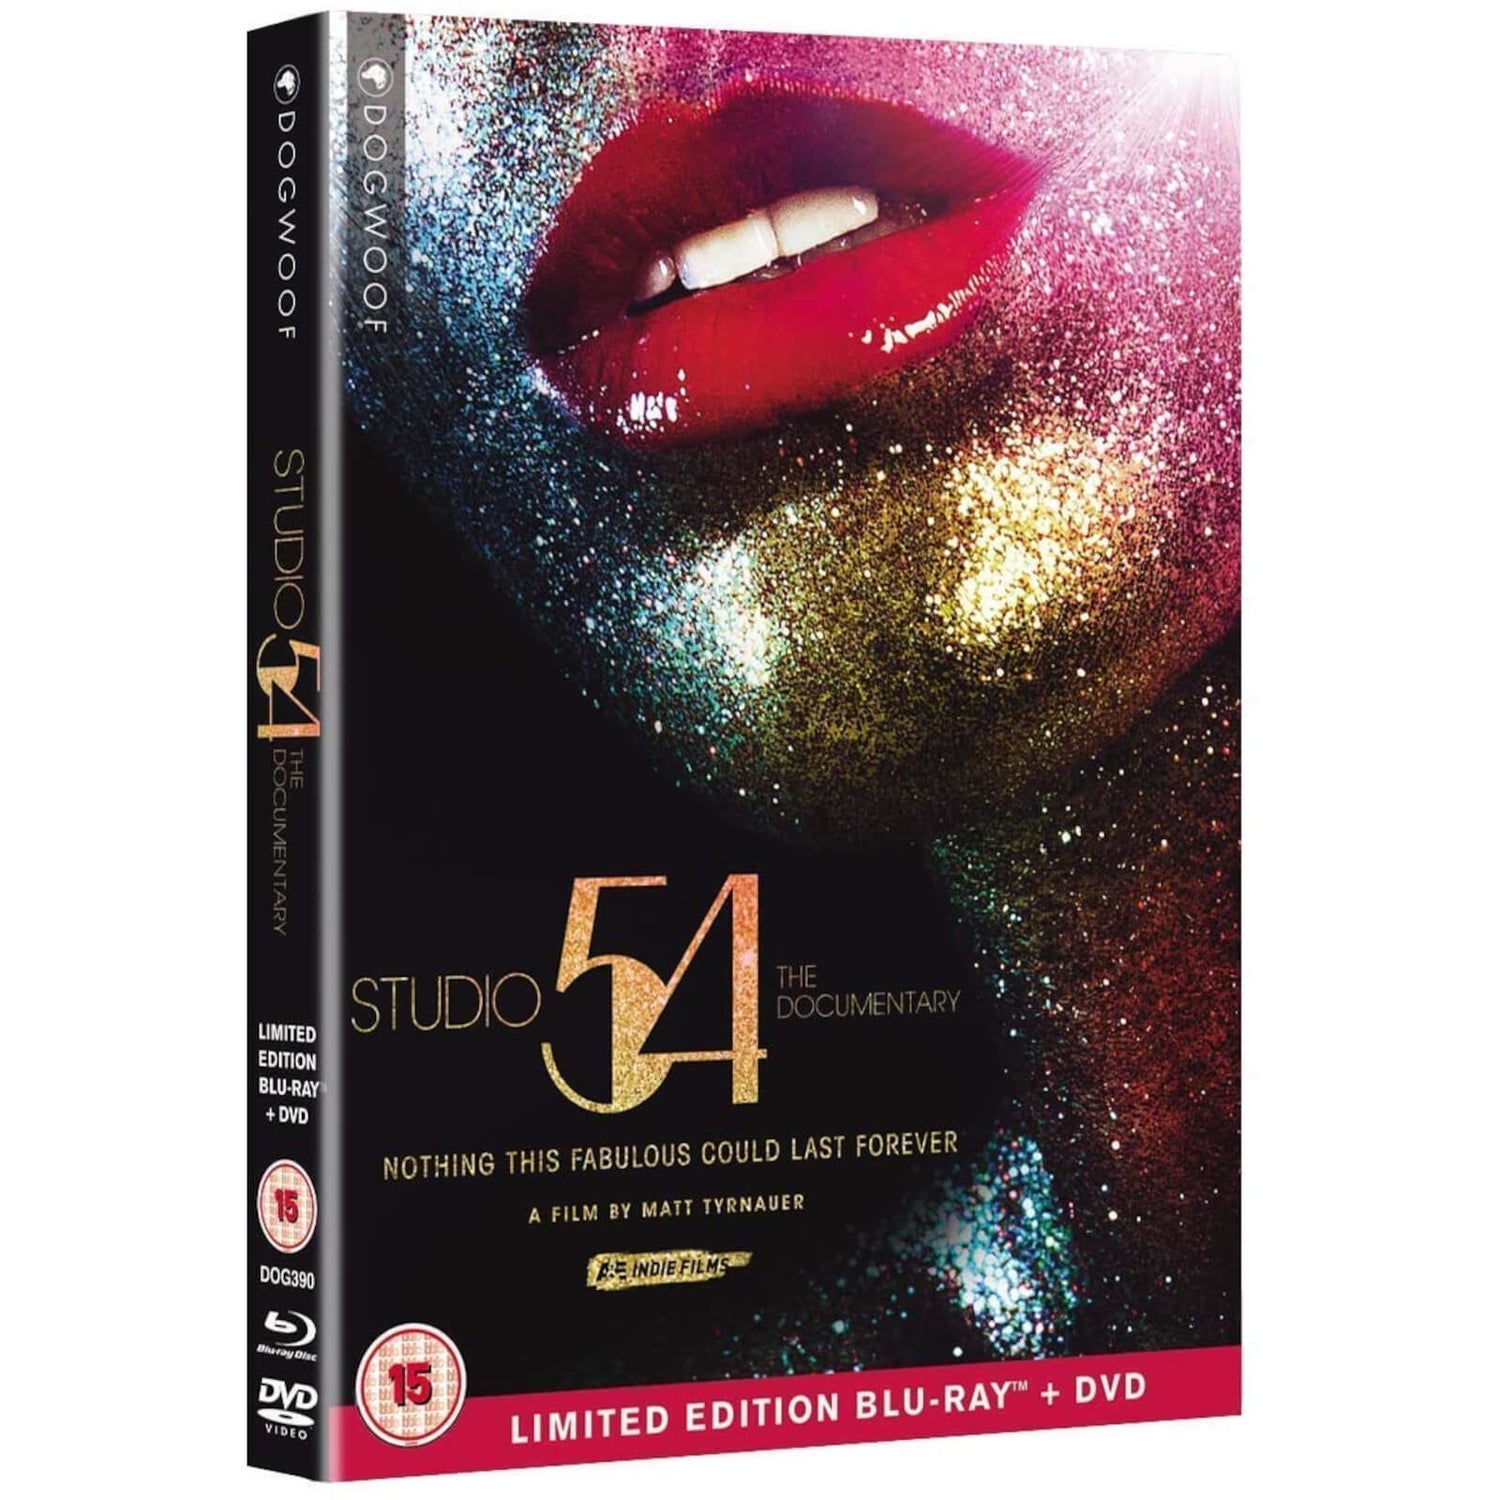 Studio 54 - Limited Edition (Dual Format)